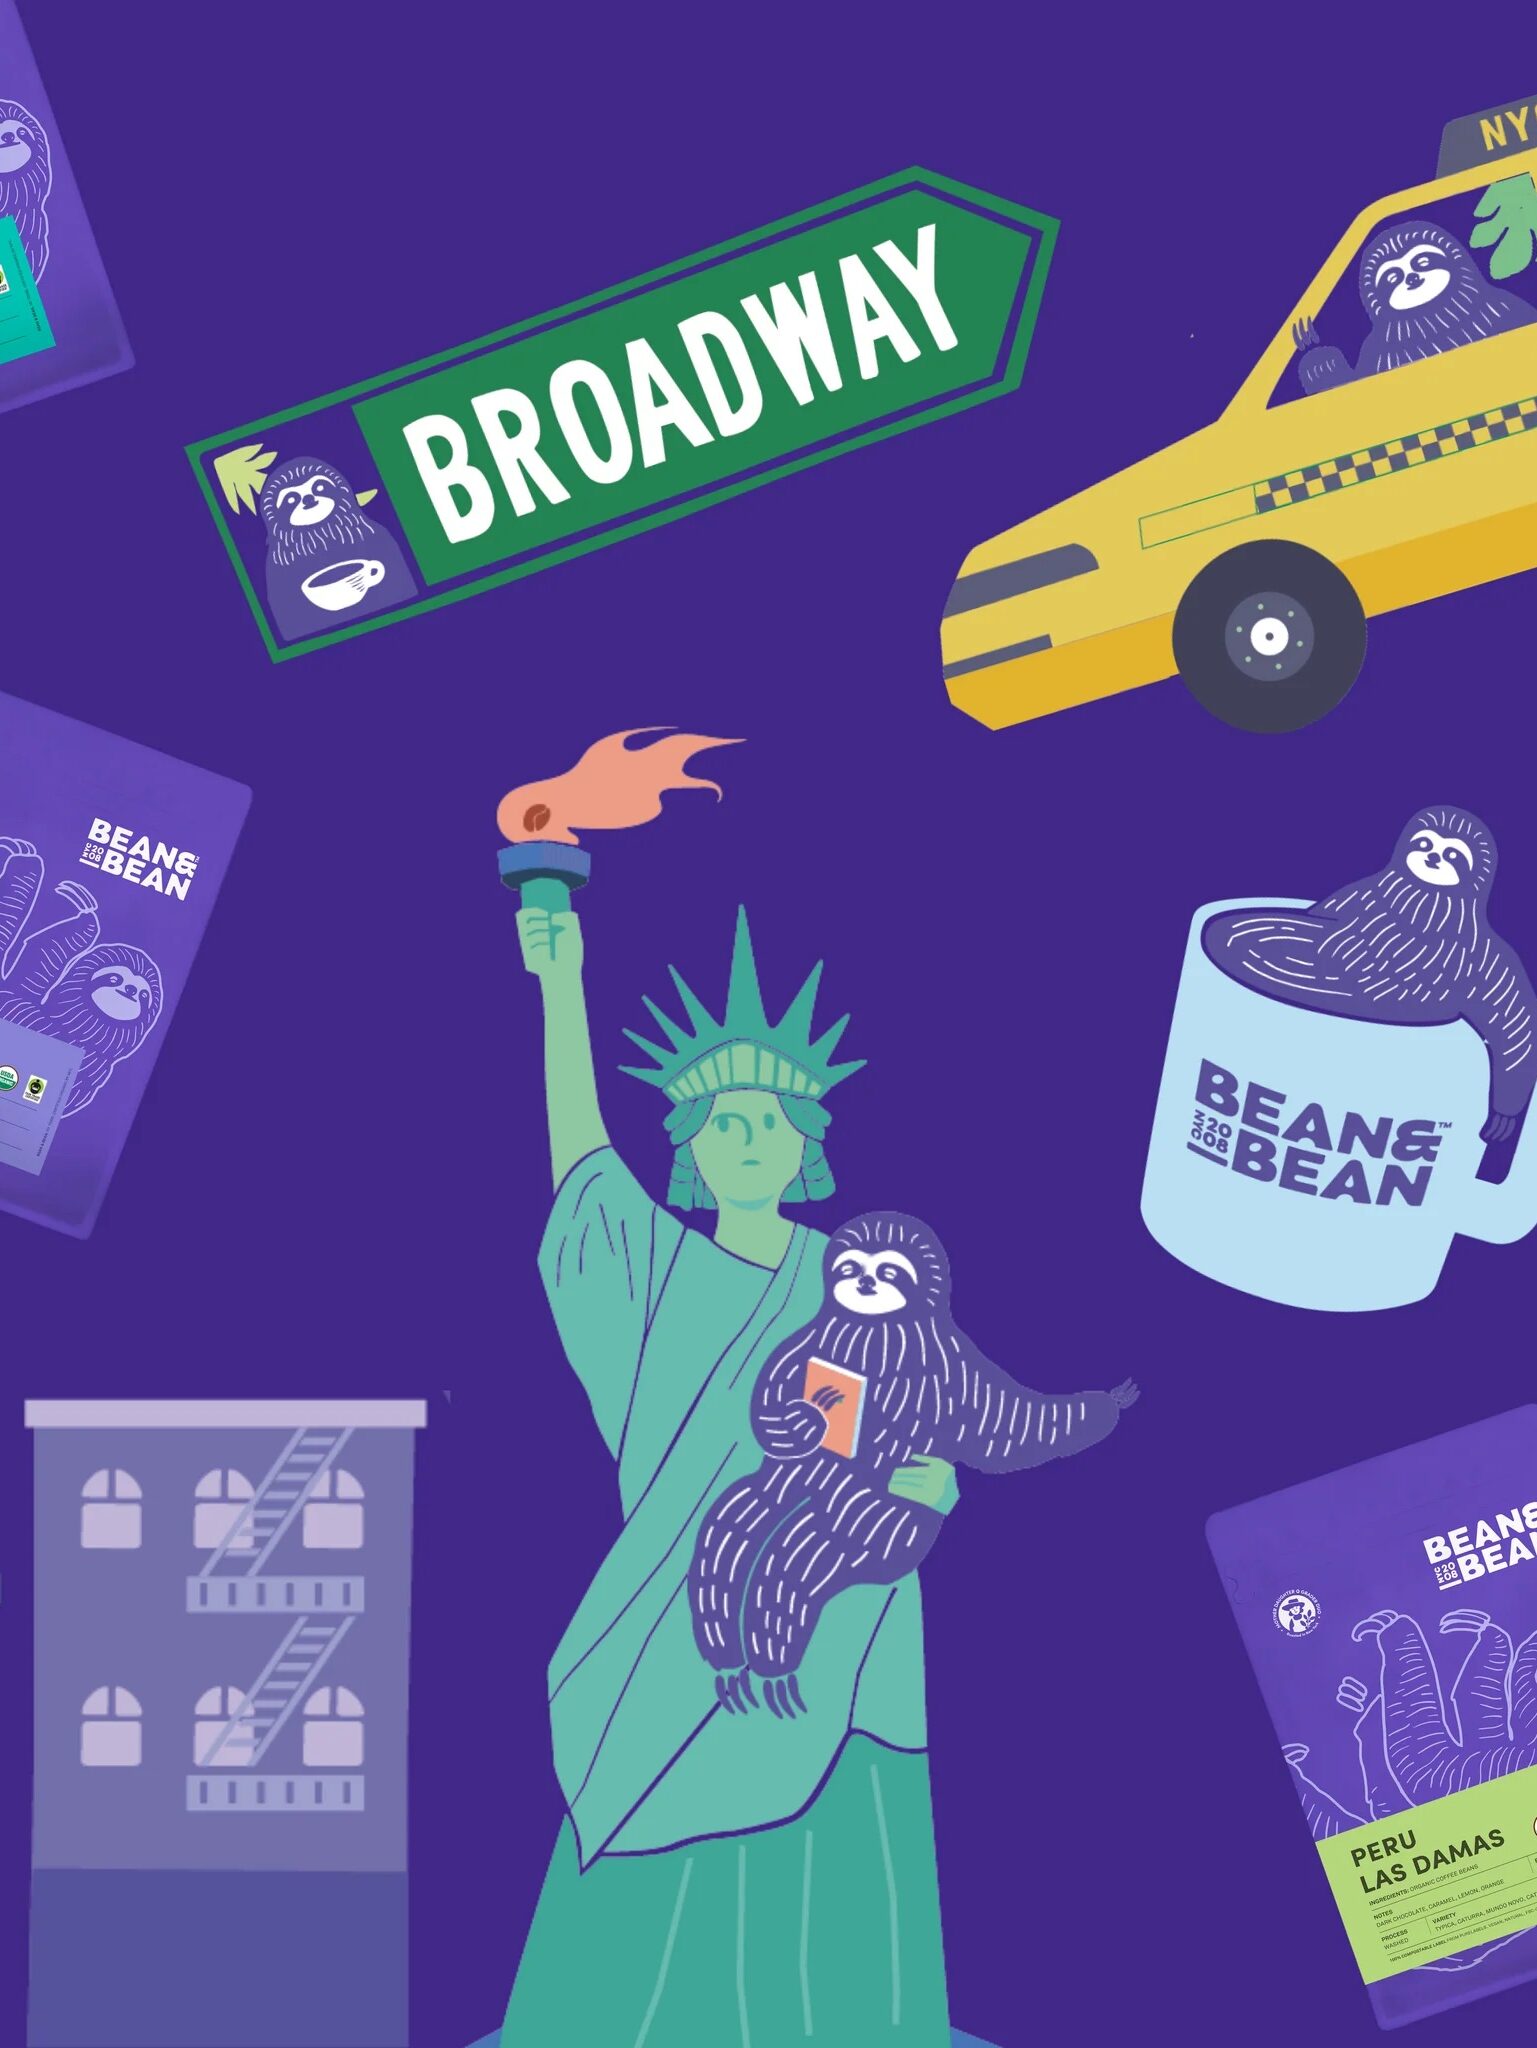 A purple cartoon of New York City icons like a taxi  cab, the Statue of Liberty, and a sign for Broadway float next to the brand's coffee bags